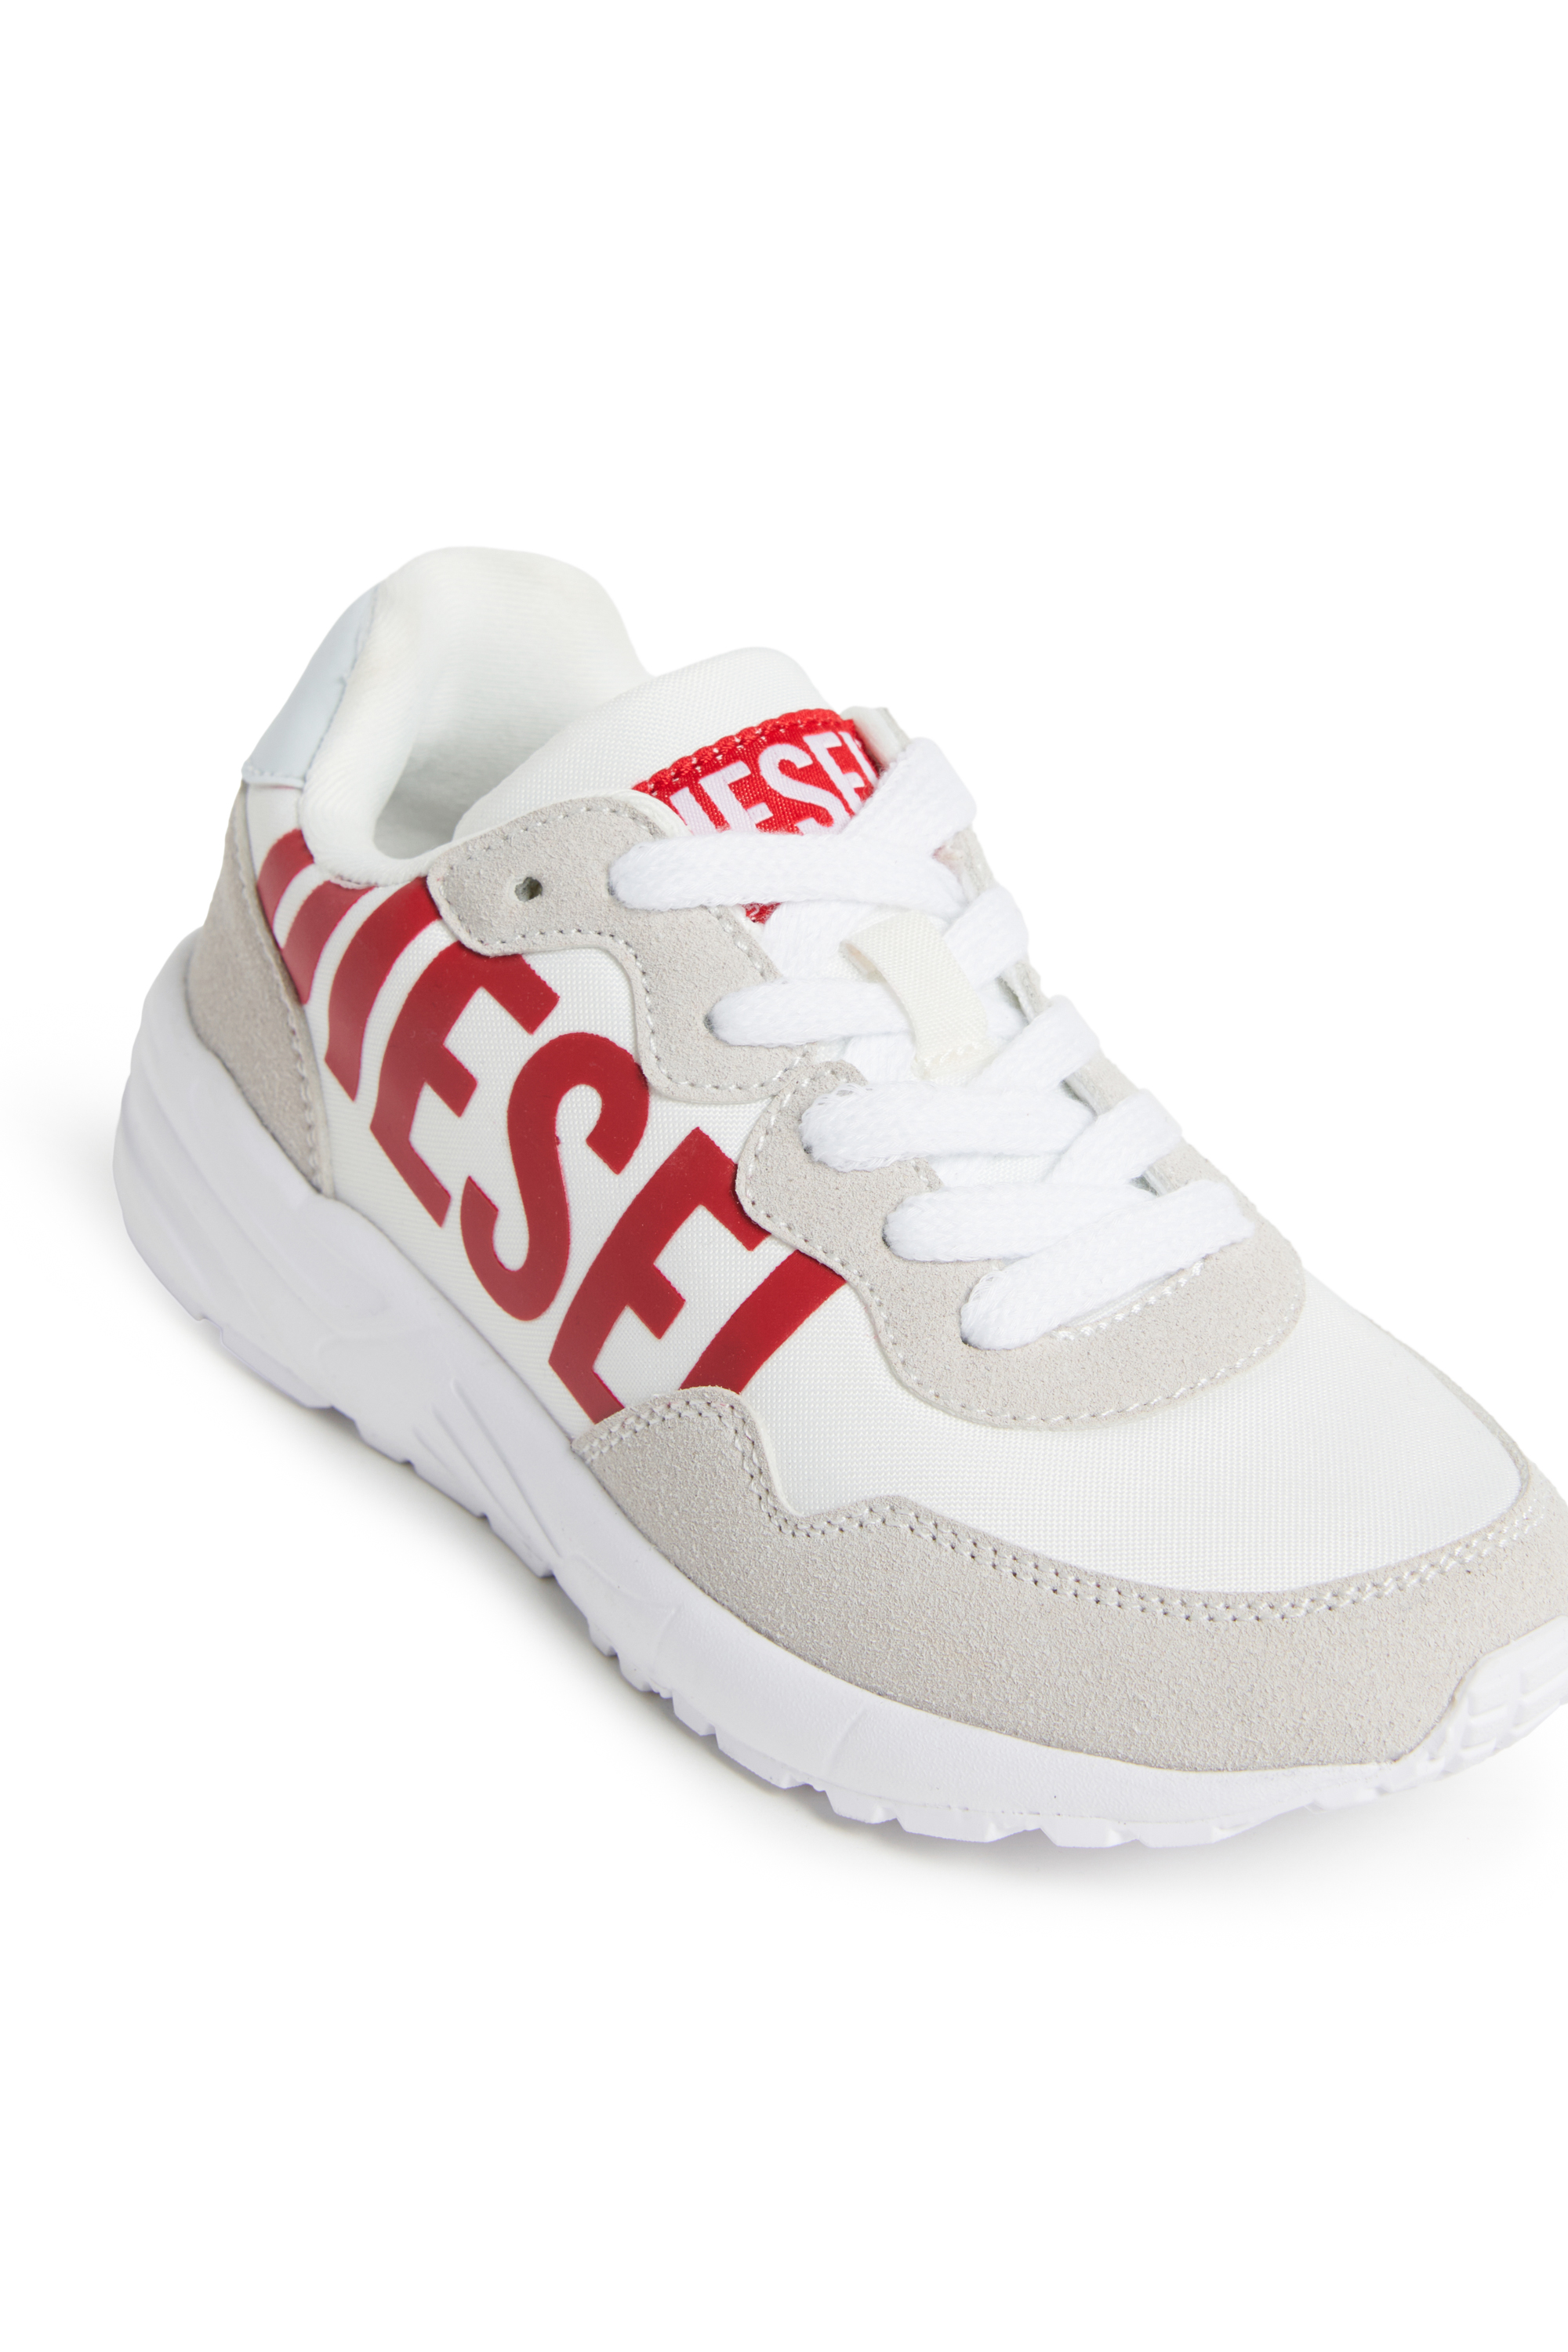 Diesel - S-STAR LIGHT LC, Unisex Nylon sneakers with shiny Diesel print in Multicolor - Image 4